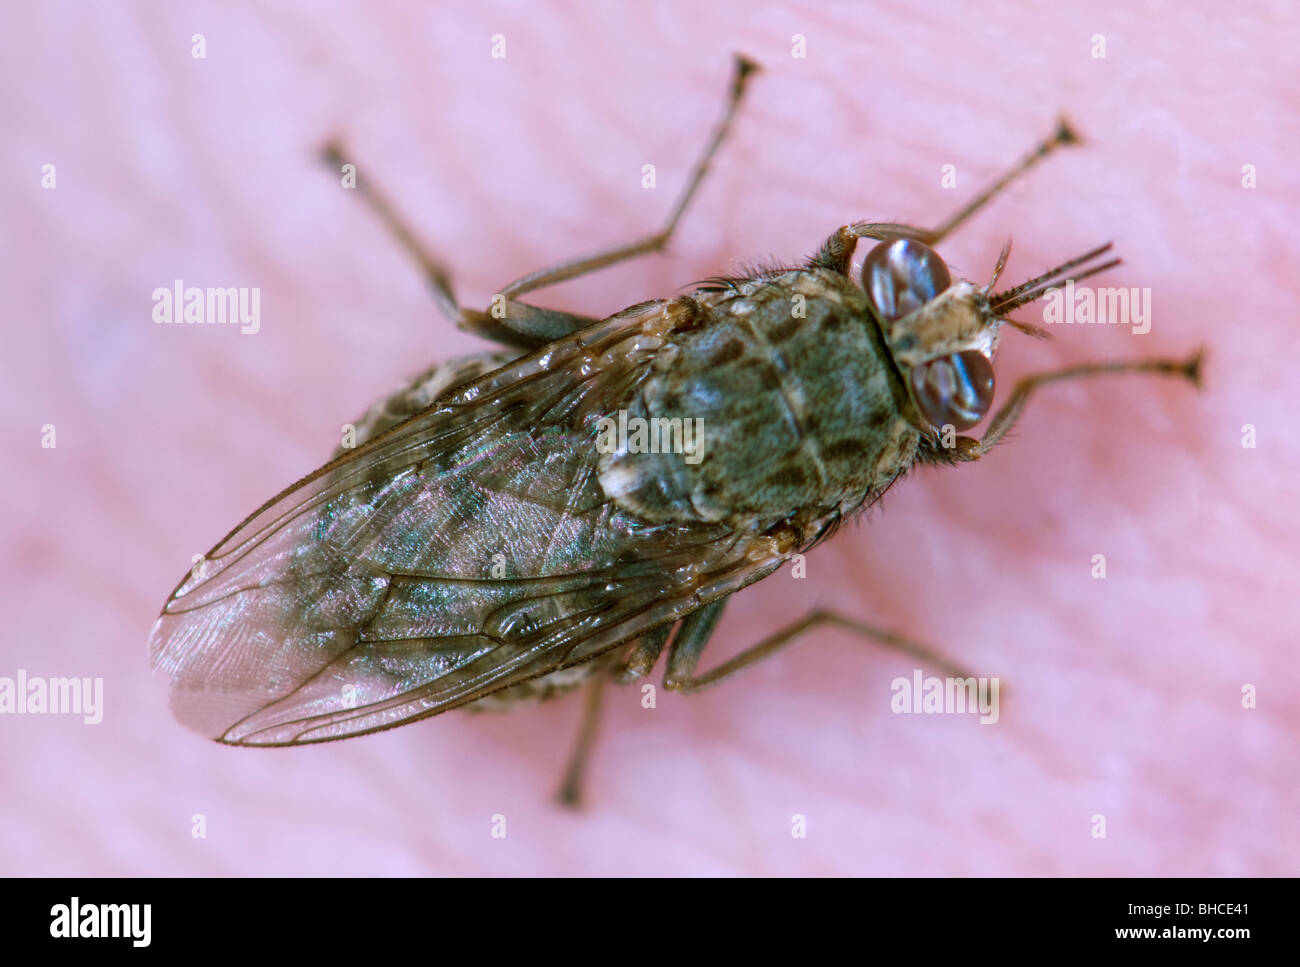 Tsetse fly biting and feeding on a person. Stock Photo